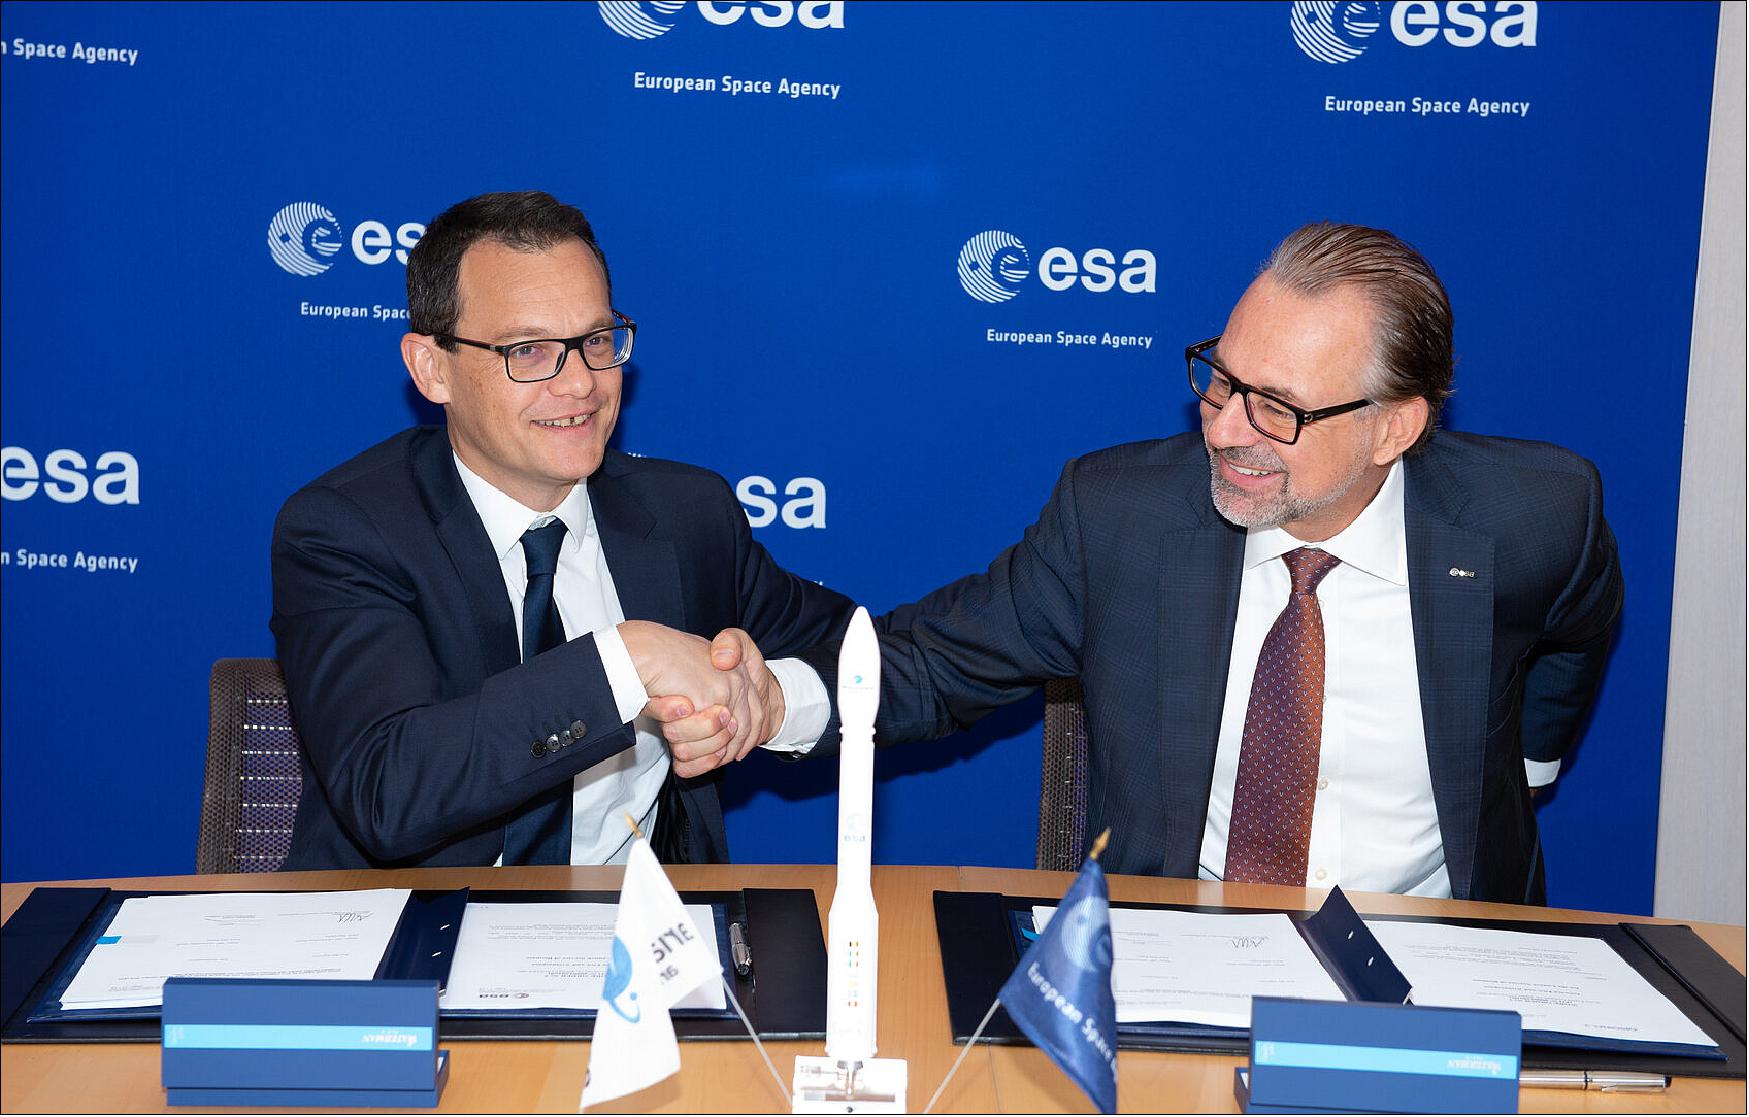 Figure 21: The contract was signed on 28 October 2019 by Josef Aschbacher, ESA’s Director of Earth Observation Programs, (right) and Stéphane Israël, Chief Executive Officer of Arianespace (image credit: ESA)